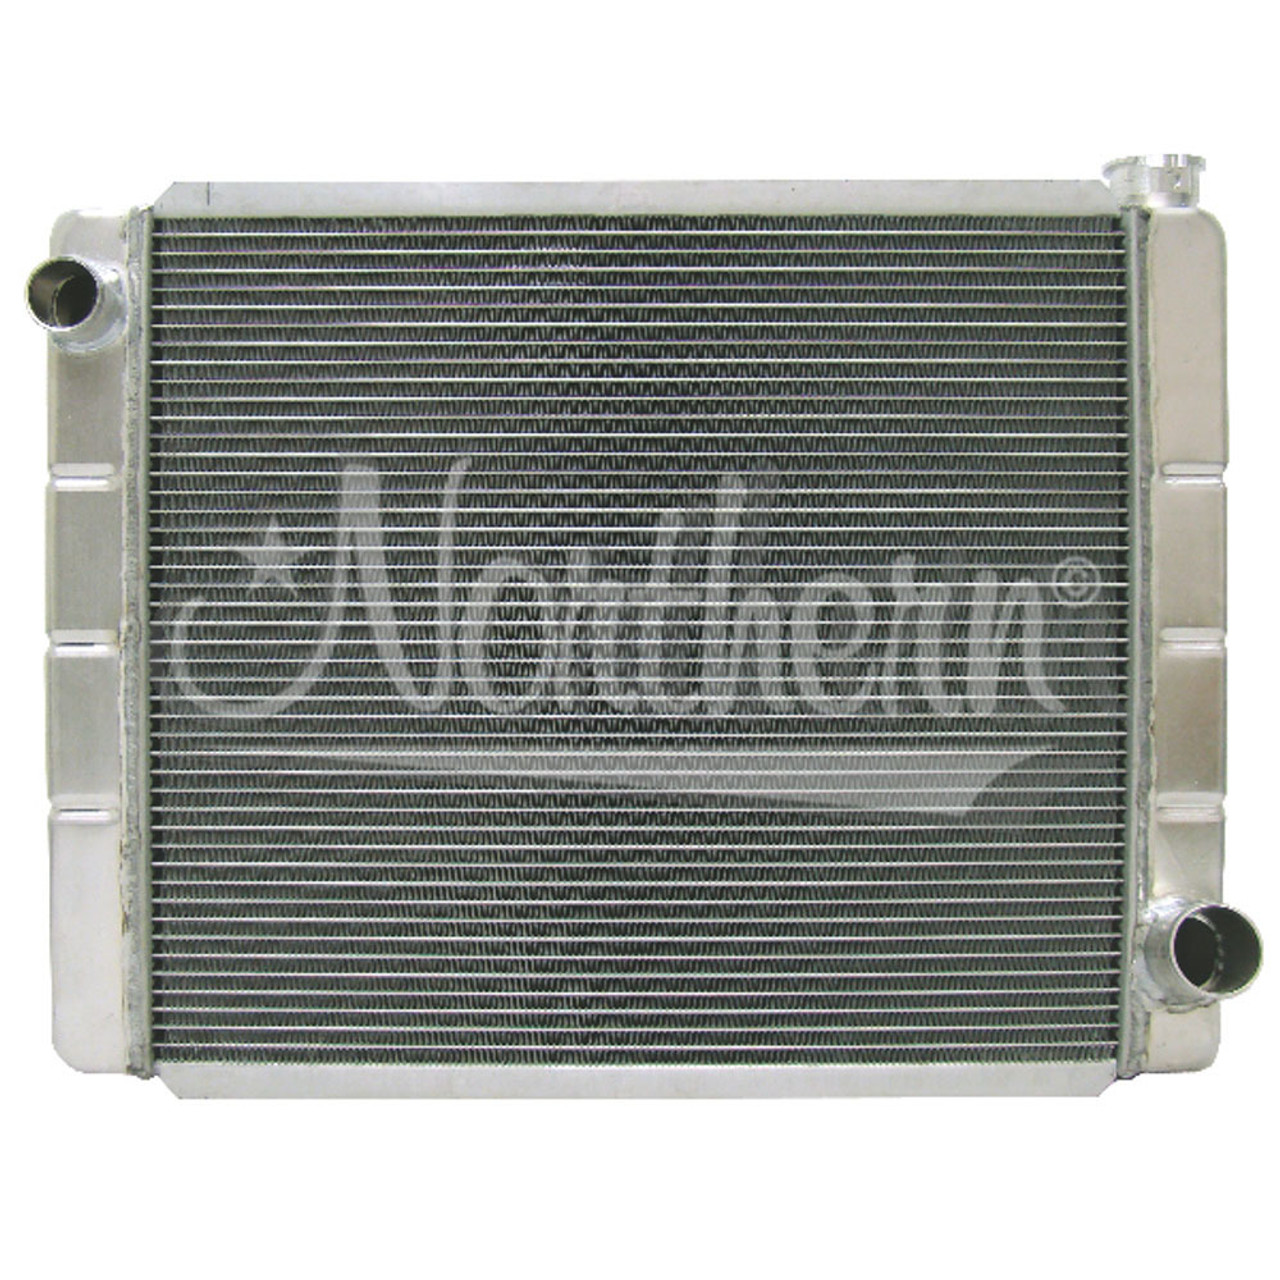 Northern Race Pro Aluminum Radiat or 26 x 19 - NRA209675